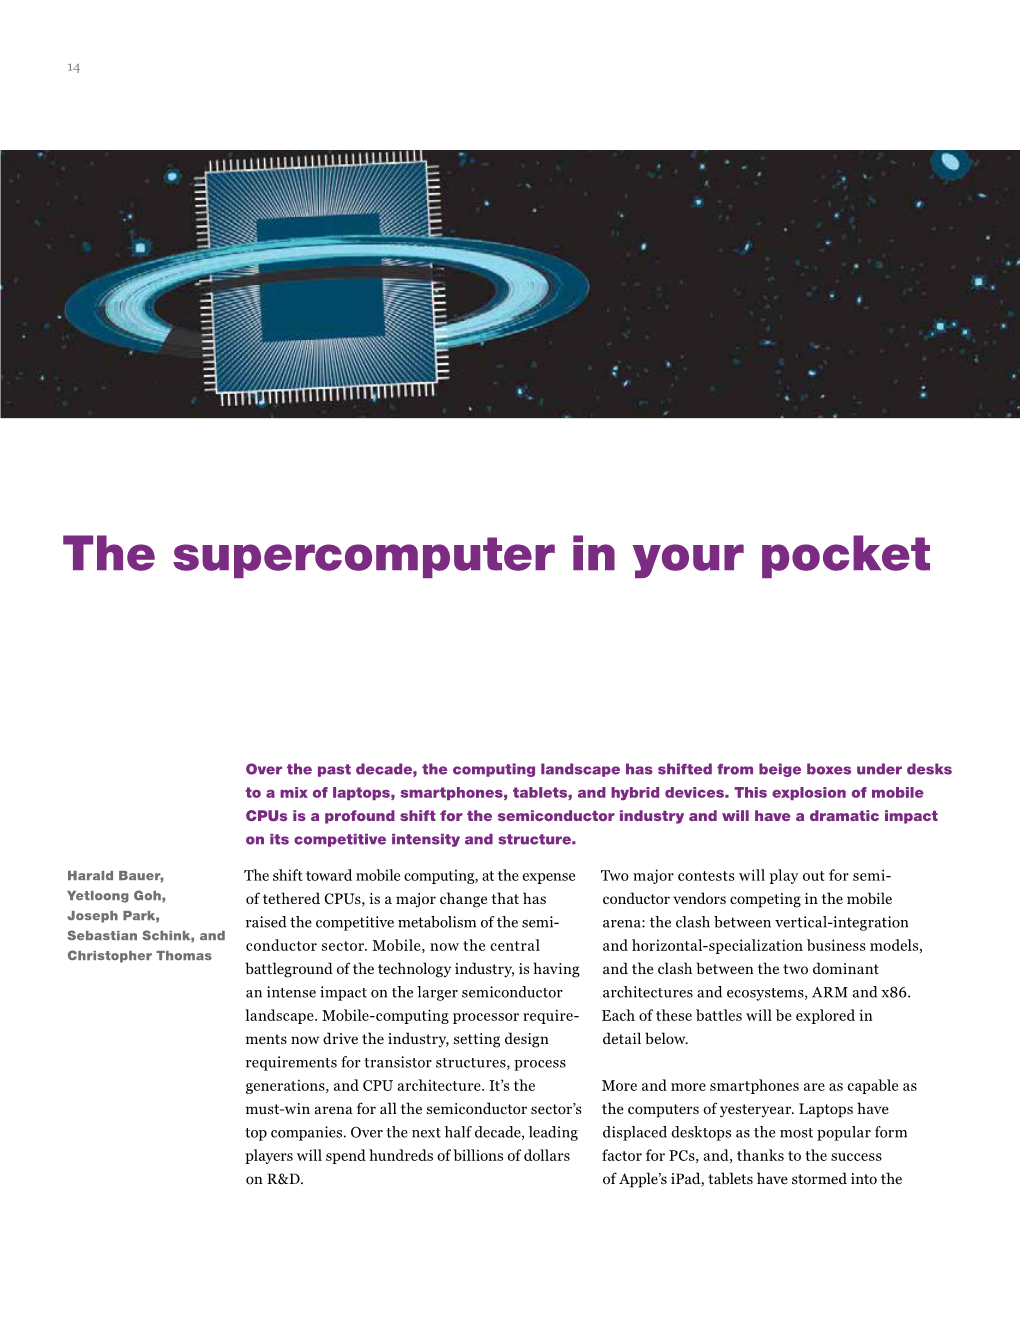 The Supercomputer in Your Pocket